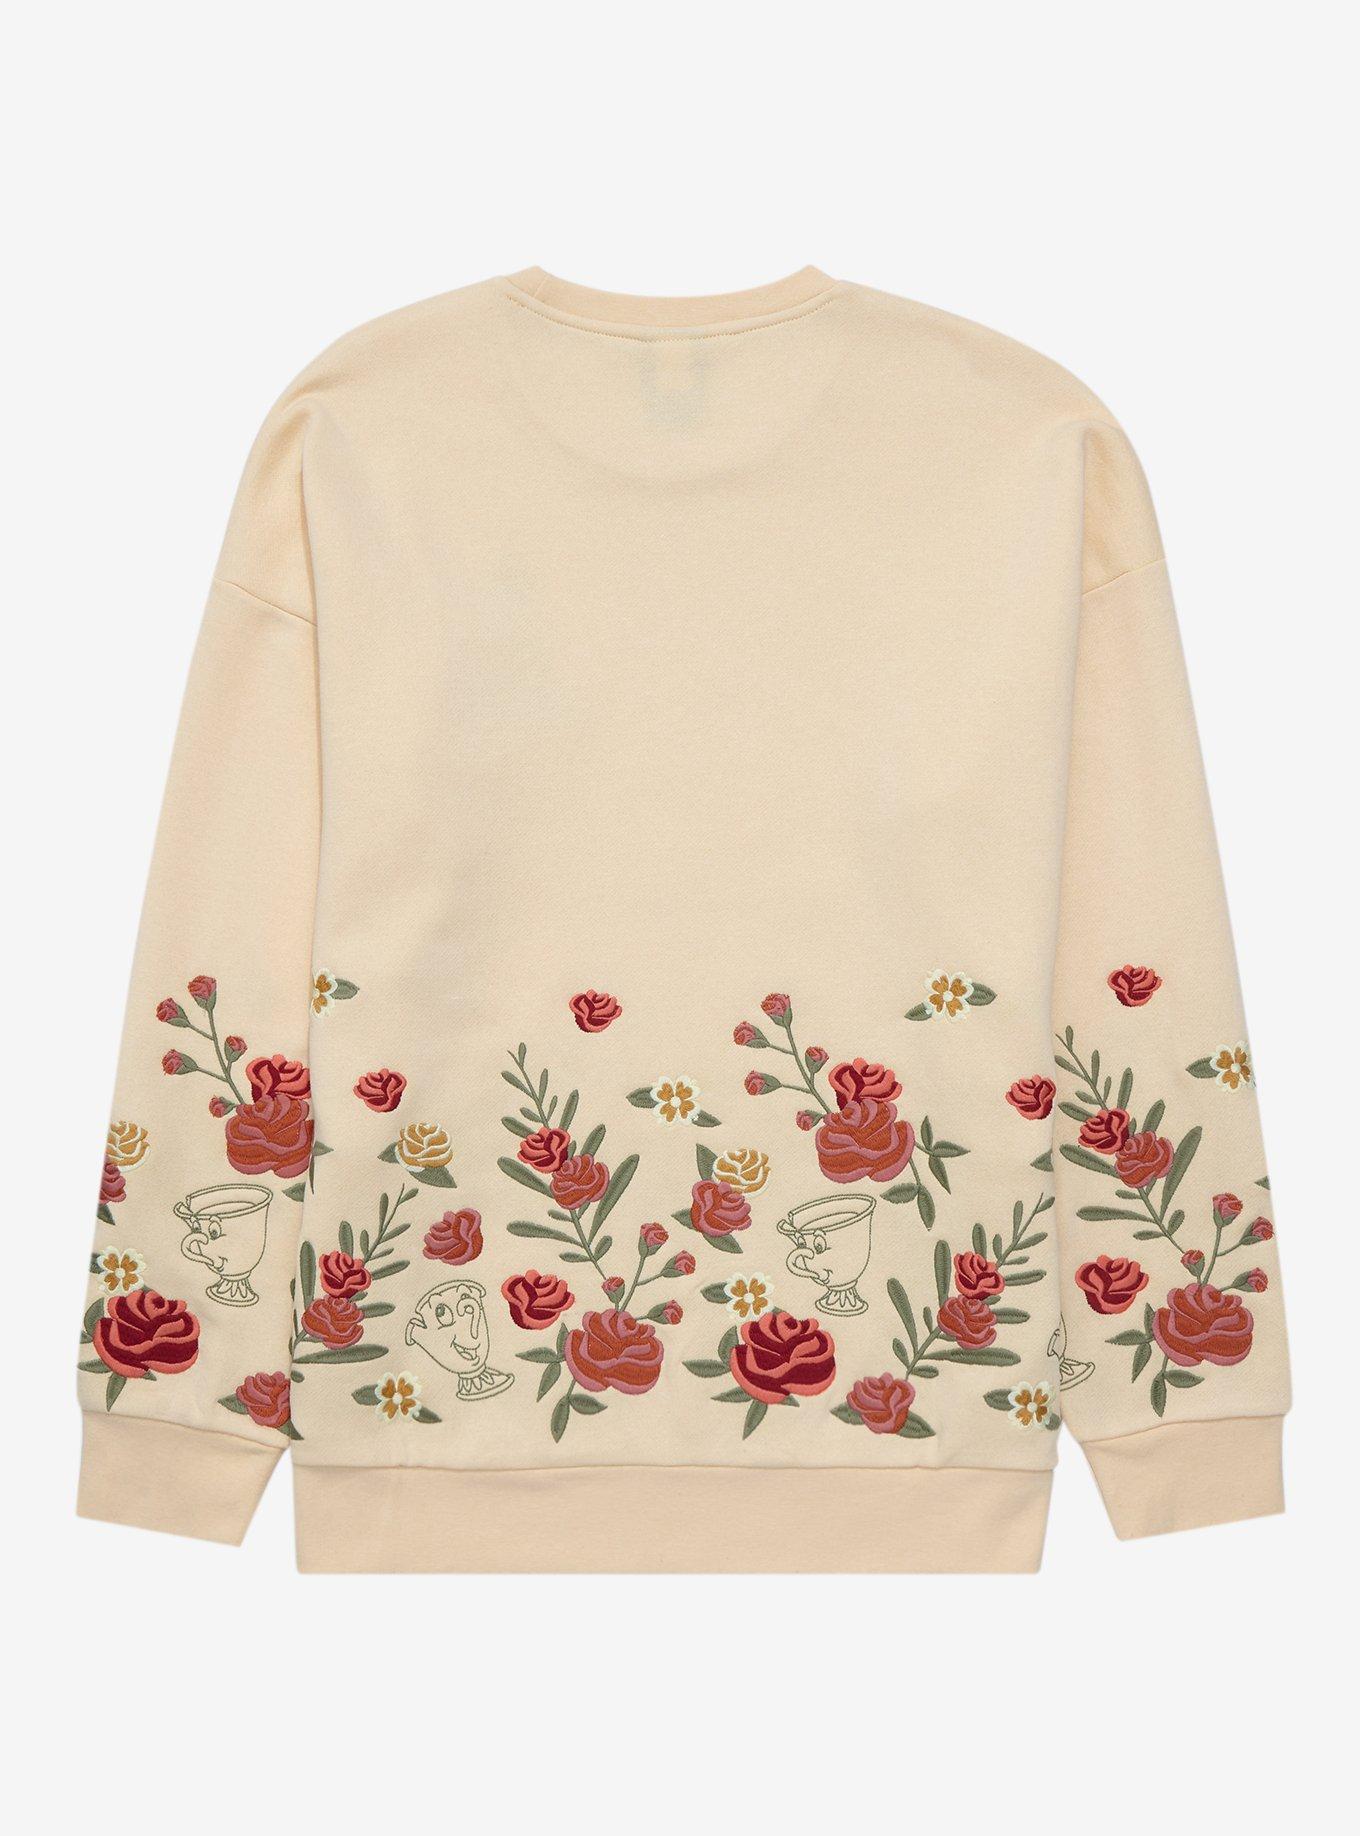 Disney Beauty and the Beast Belle Floral Women's Crewneck - BoxLunch Exclusive, LIGHT YELLOW, alternate